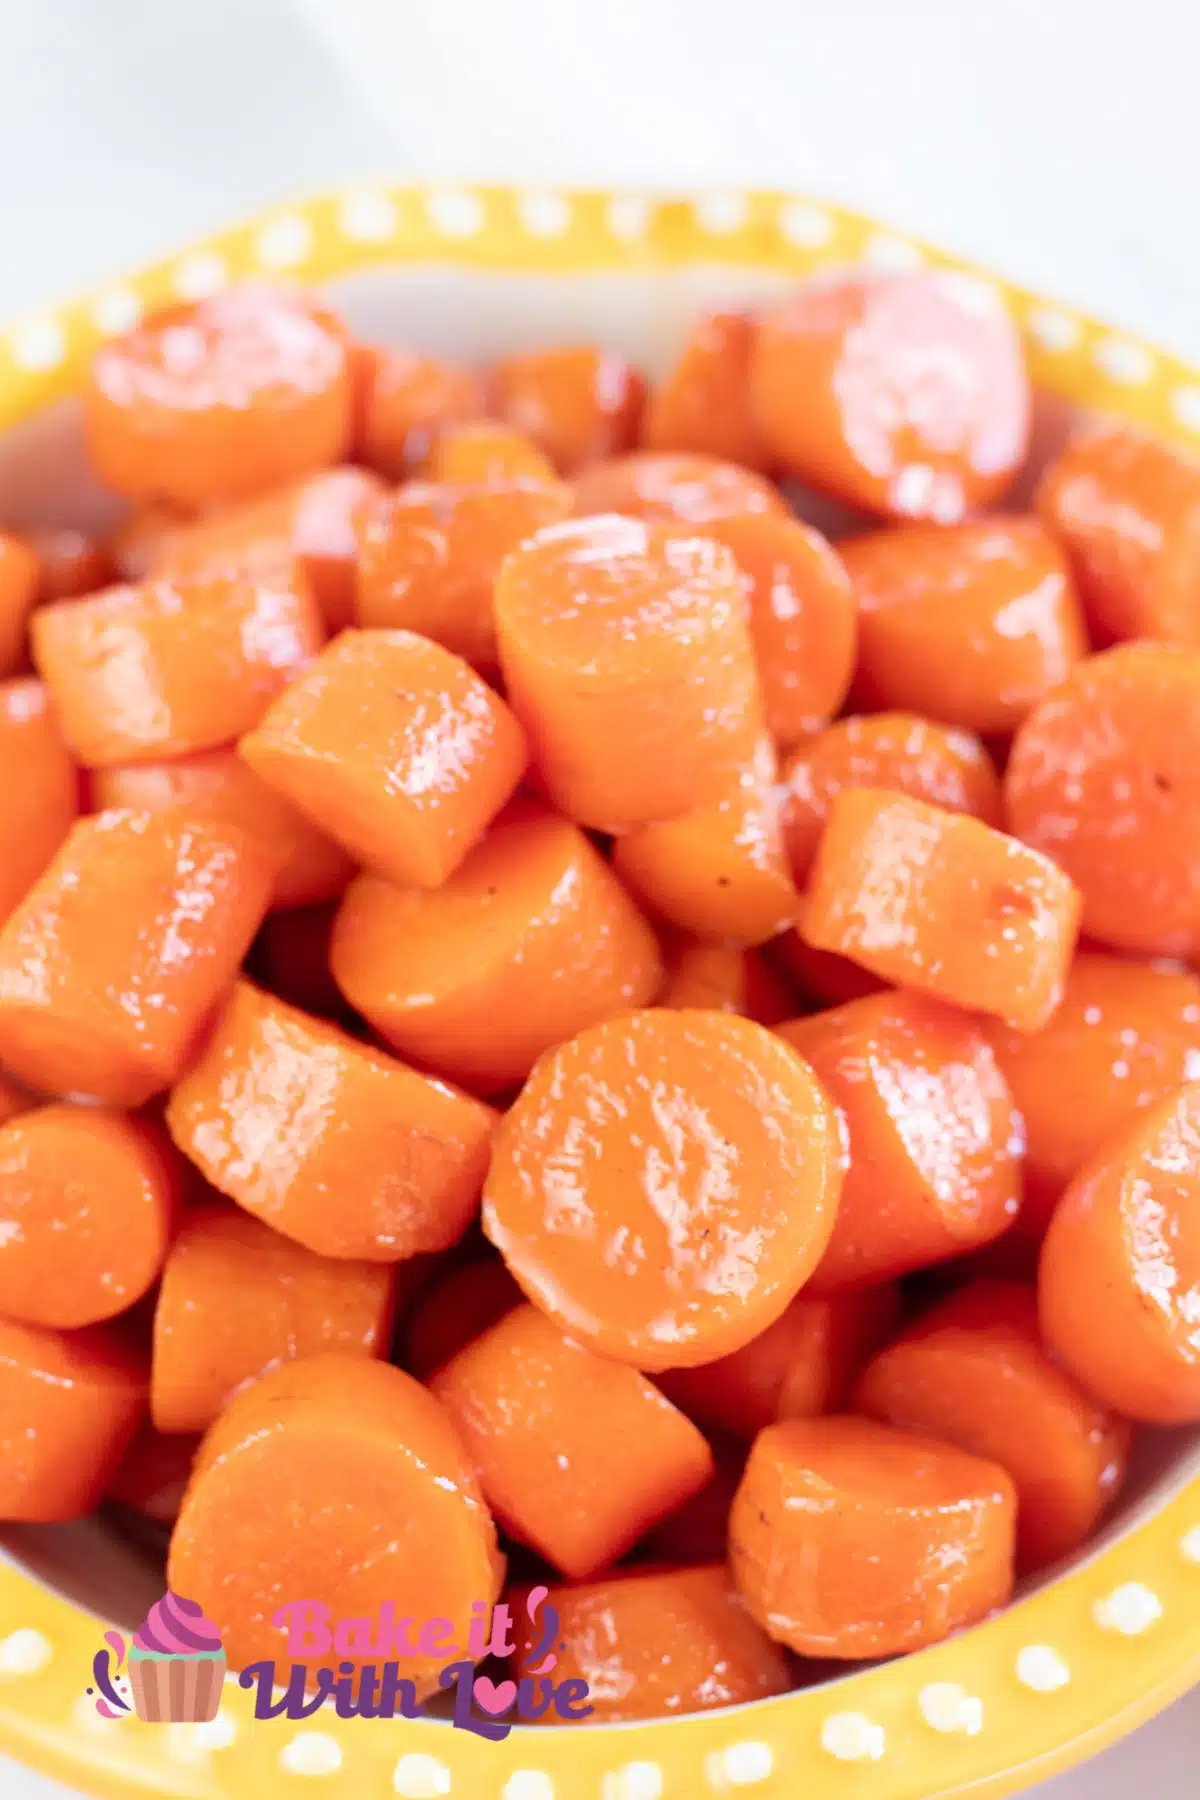 Tall image of a bowl of candied carrots.